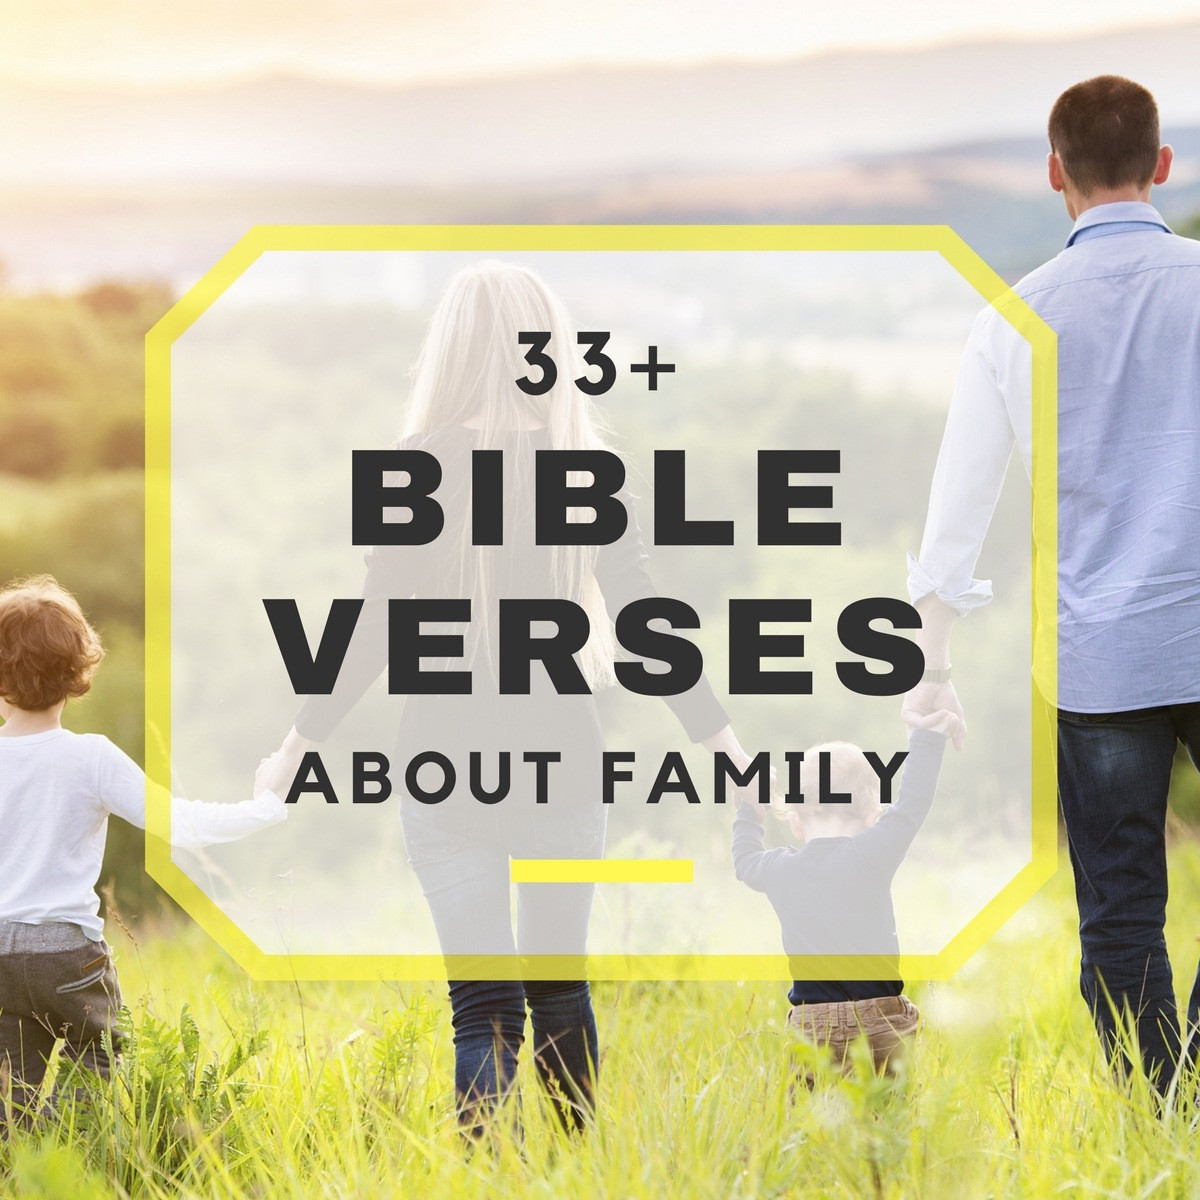 Quote From The Bible About Family
 33 Bible Verses About Family Bible Scriptures About